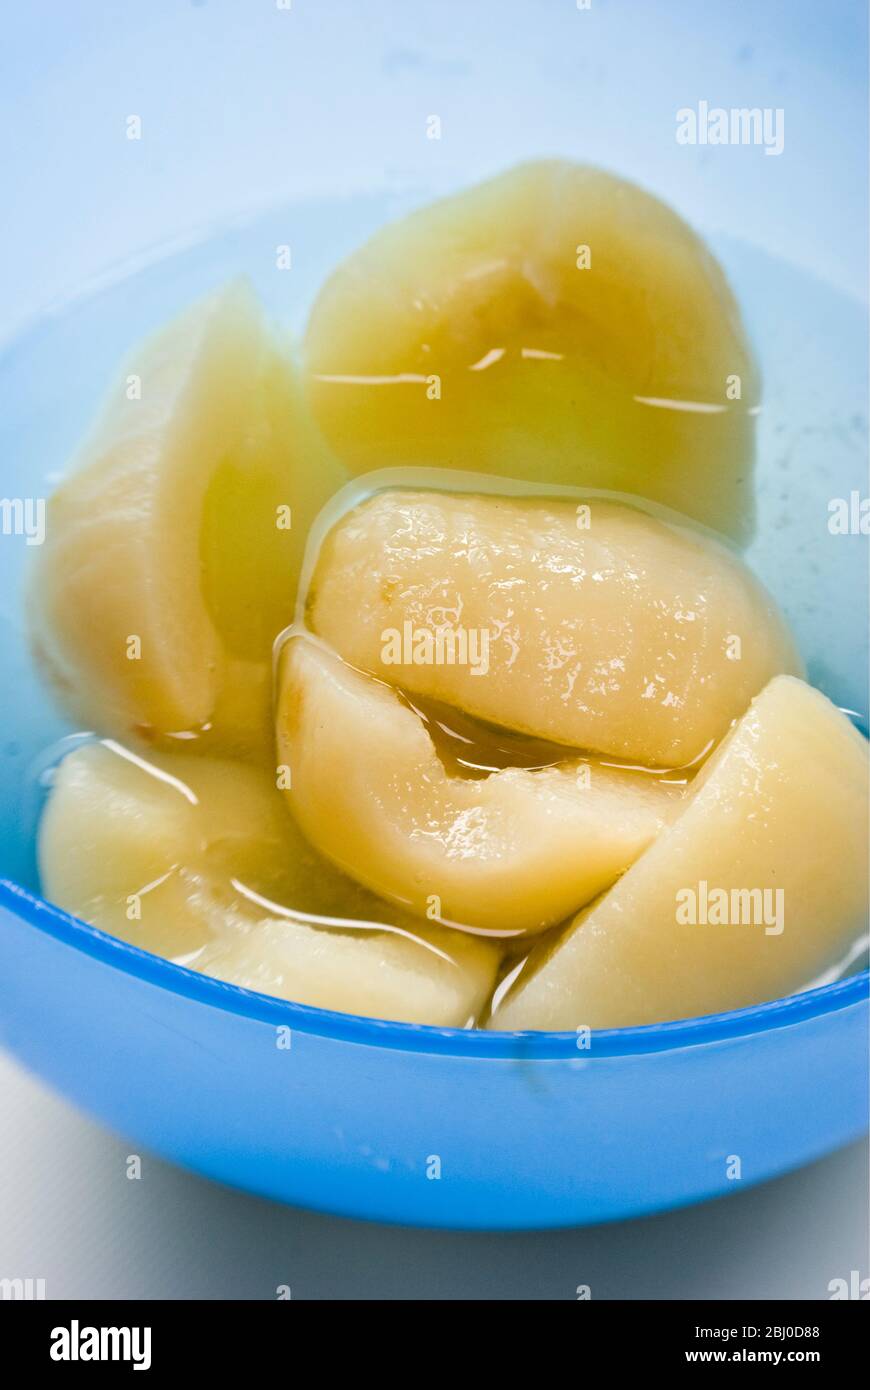 Canned Bartlett pears opened and turned into a blue bowl - Stock Photo